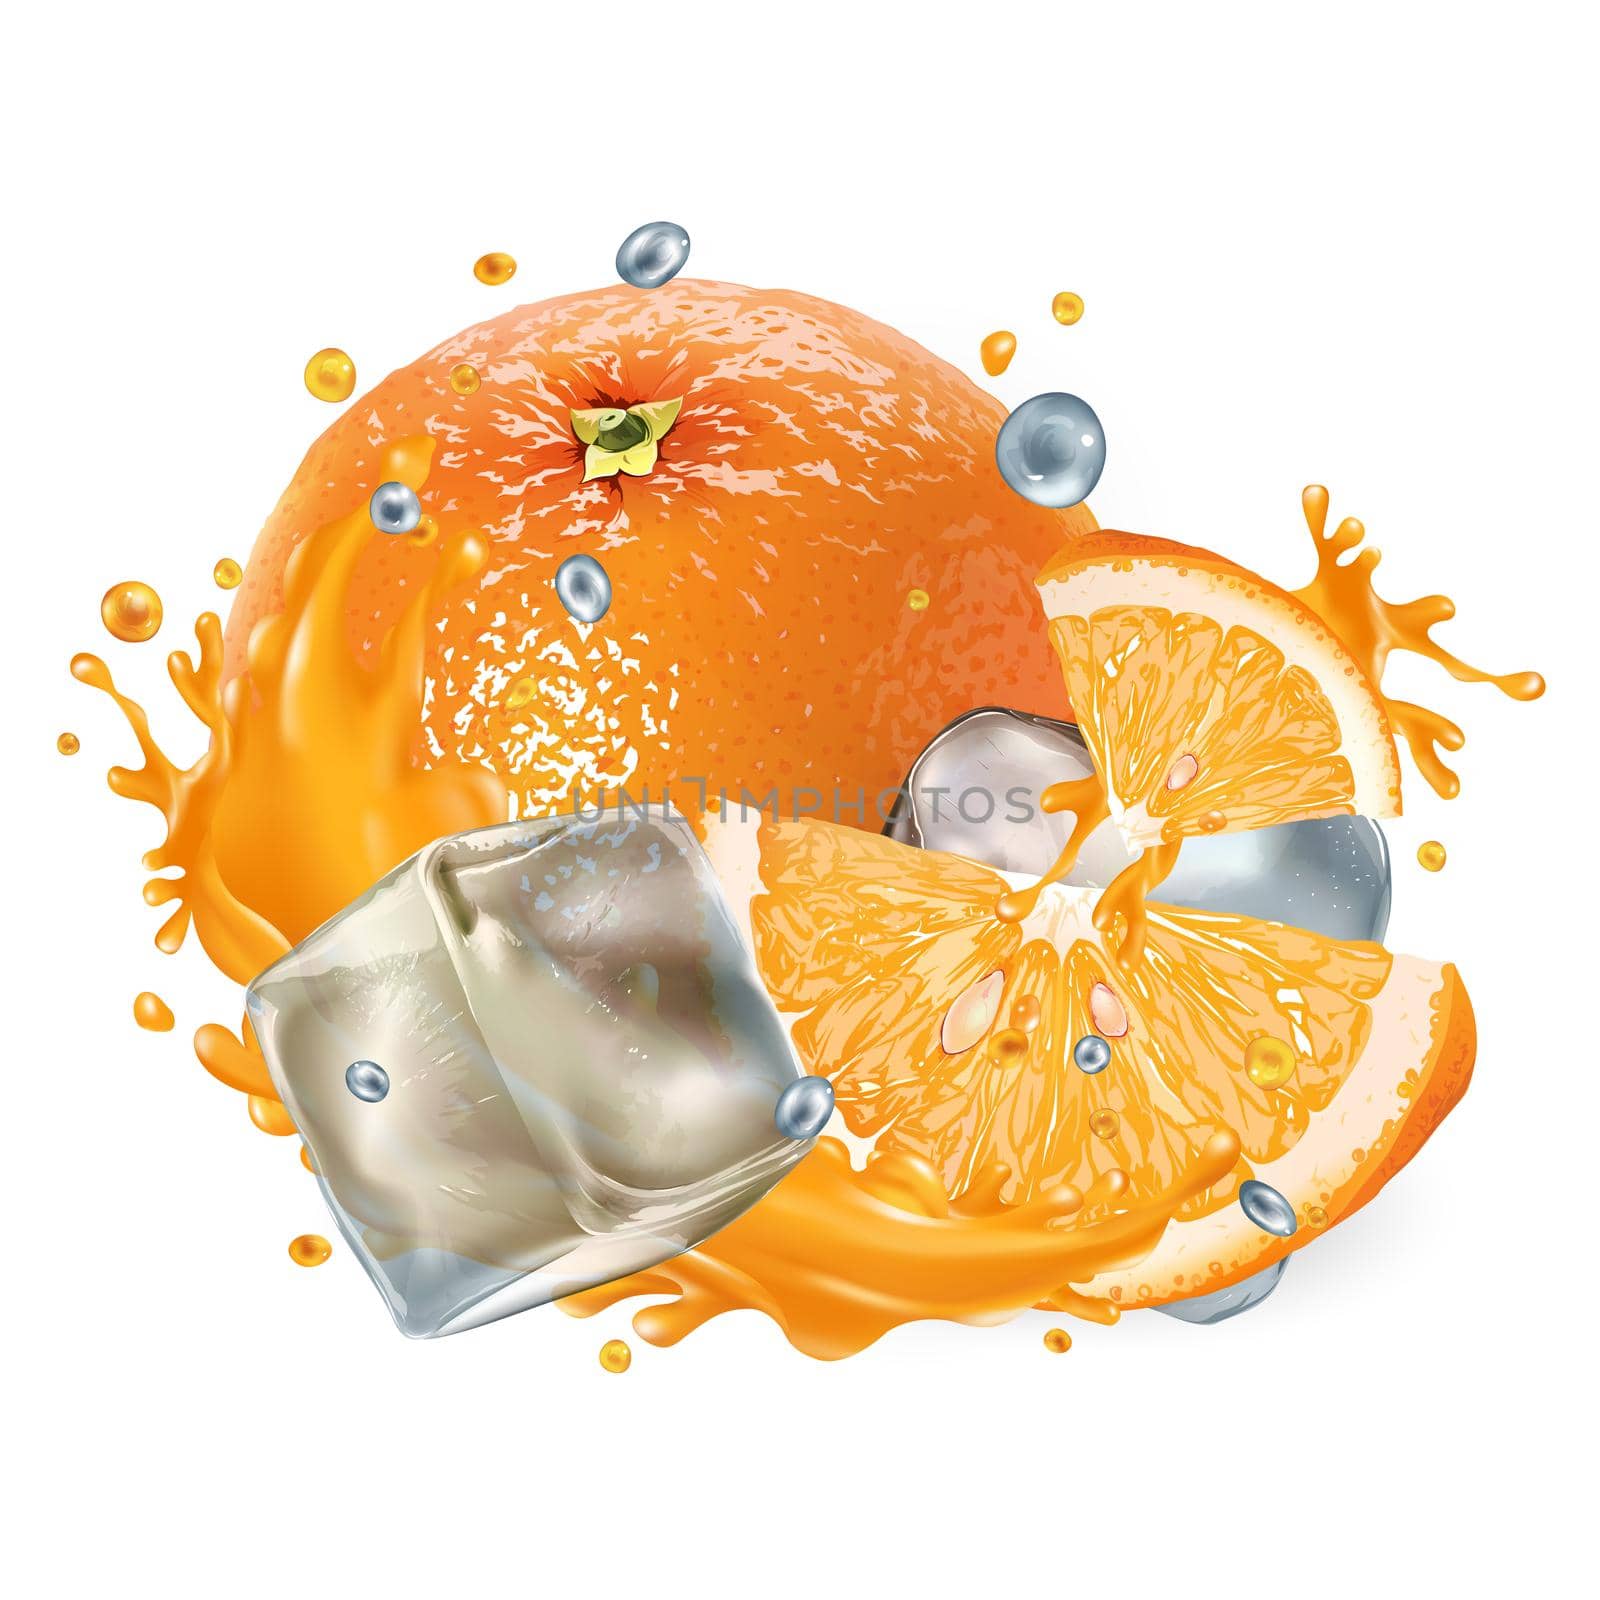 Composition with fresh orange and ice cubes on a white background. Realistic style illustration.